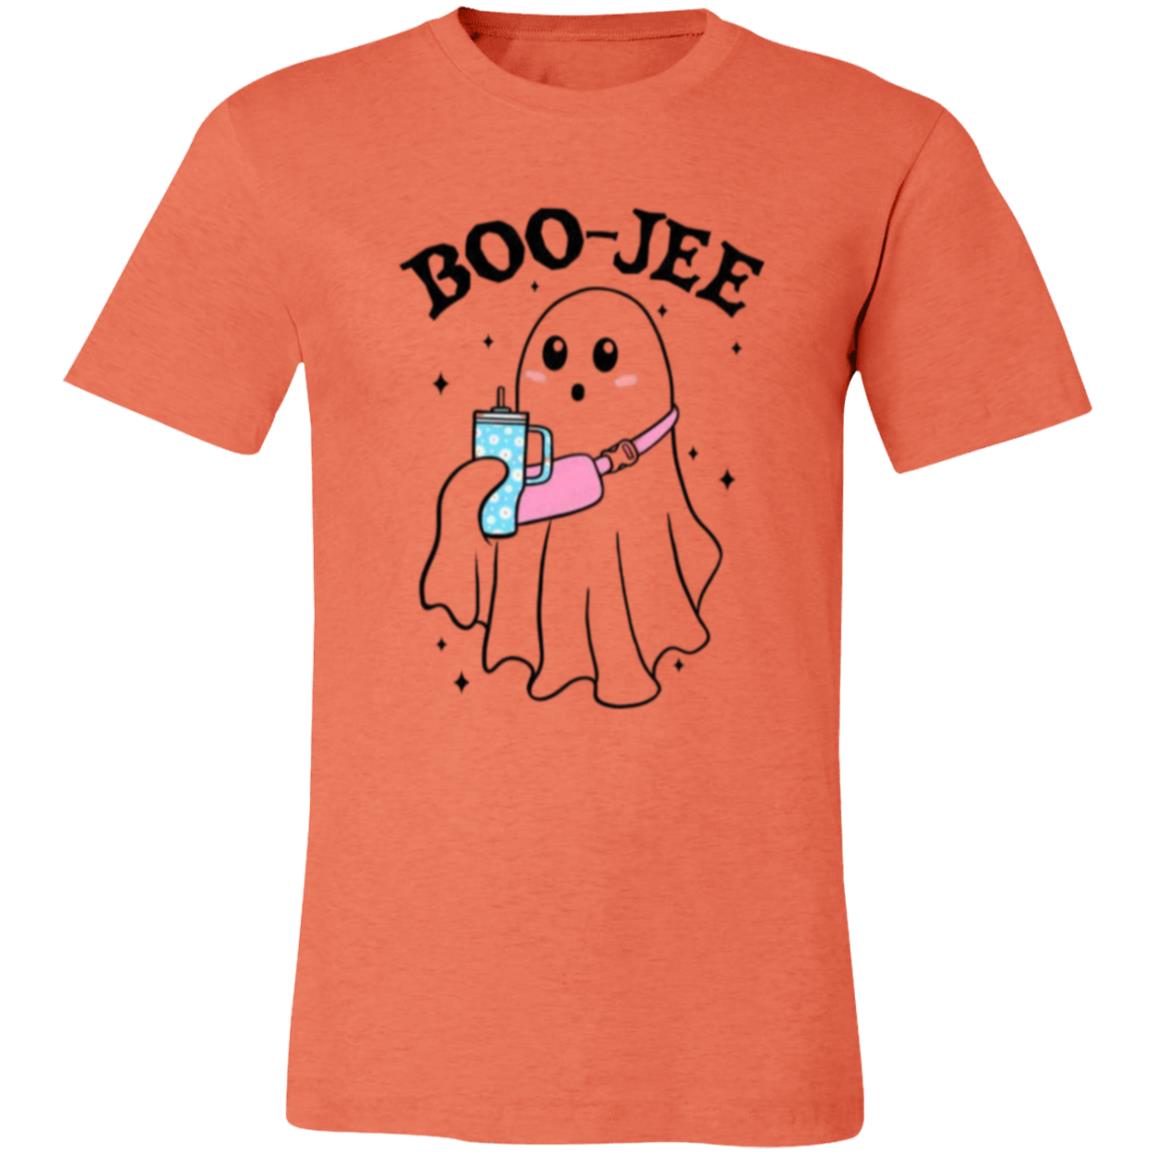 BOO-JEE Halloween T-Shirt| For Him| For Her| For the Spooky Occasion.